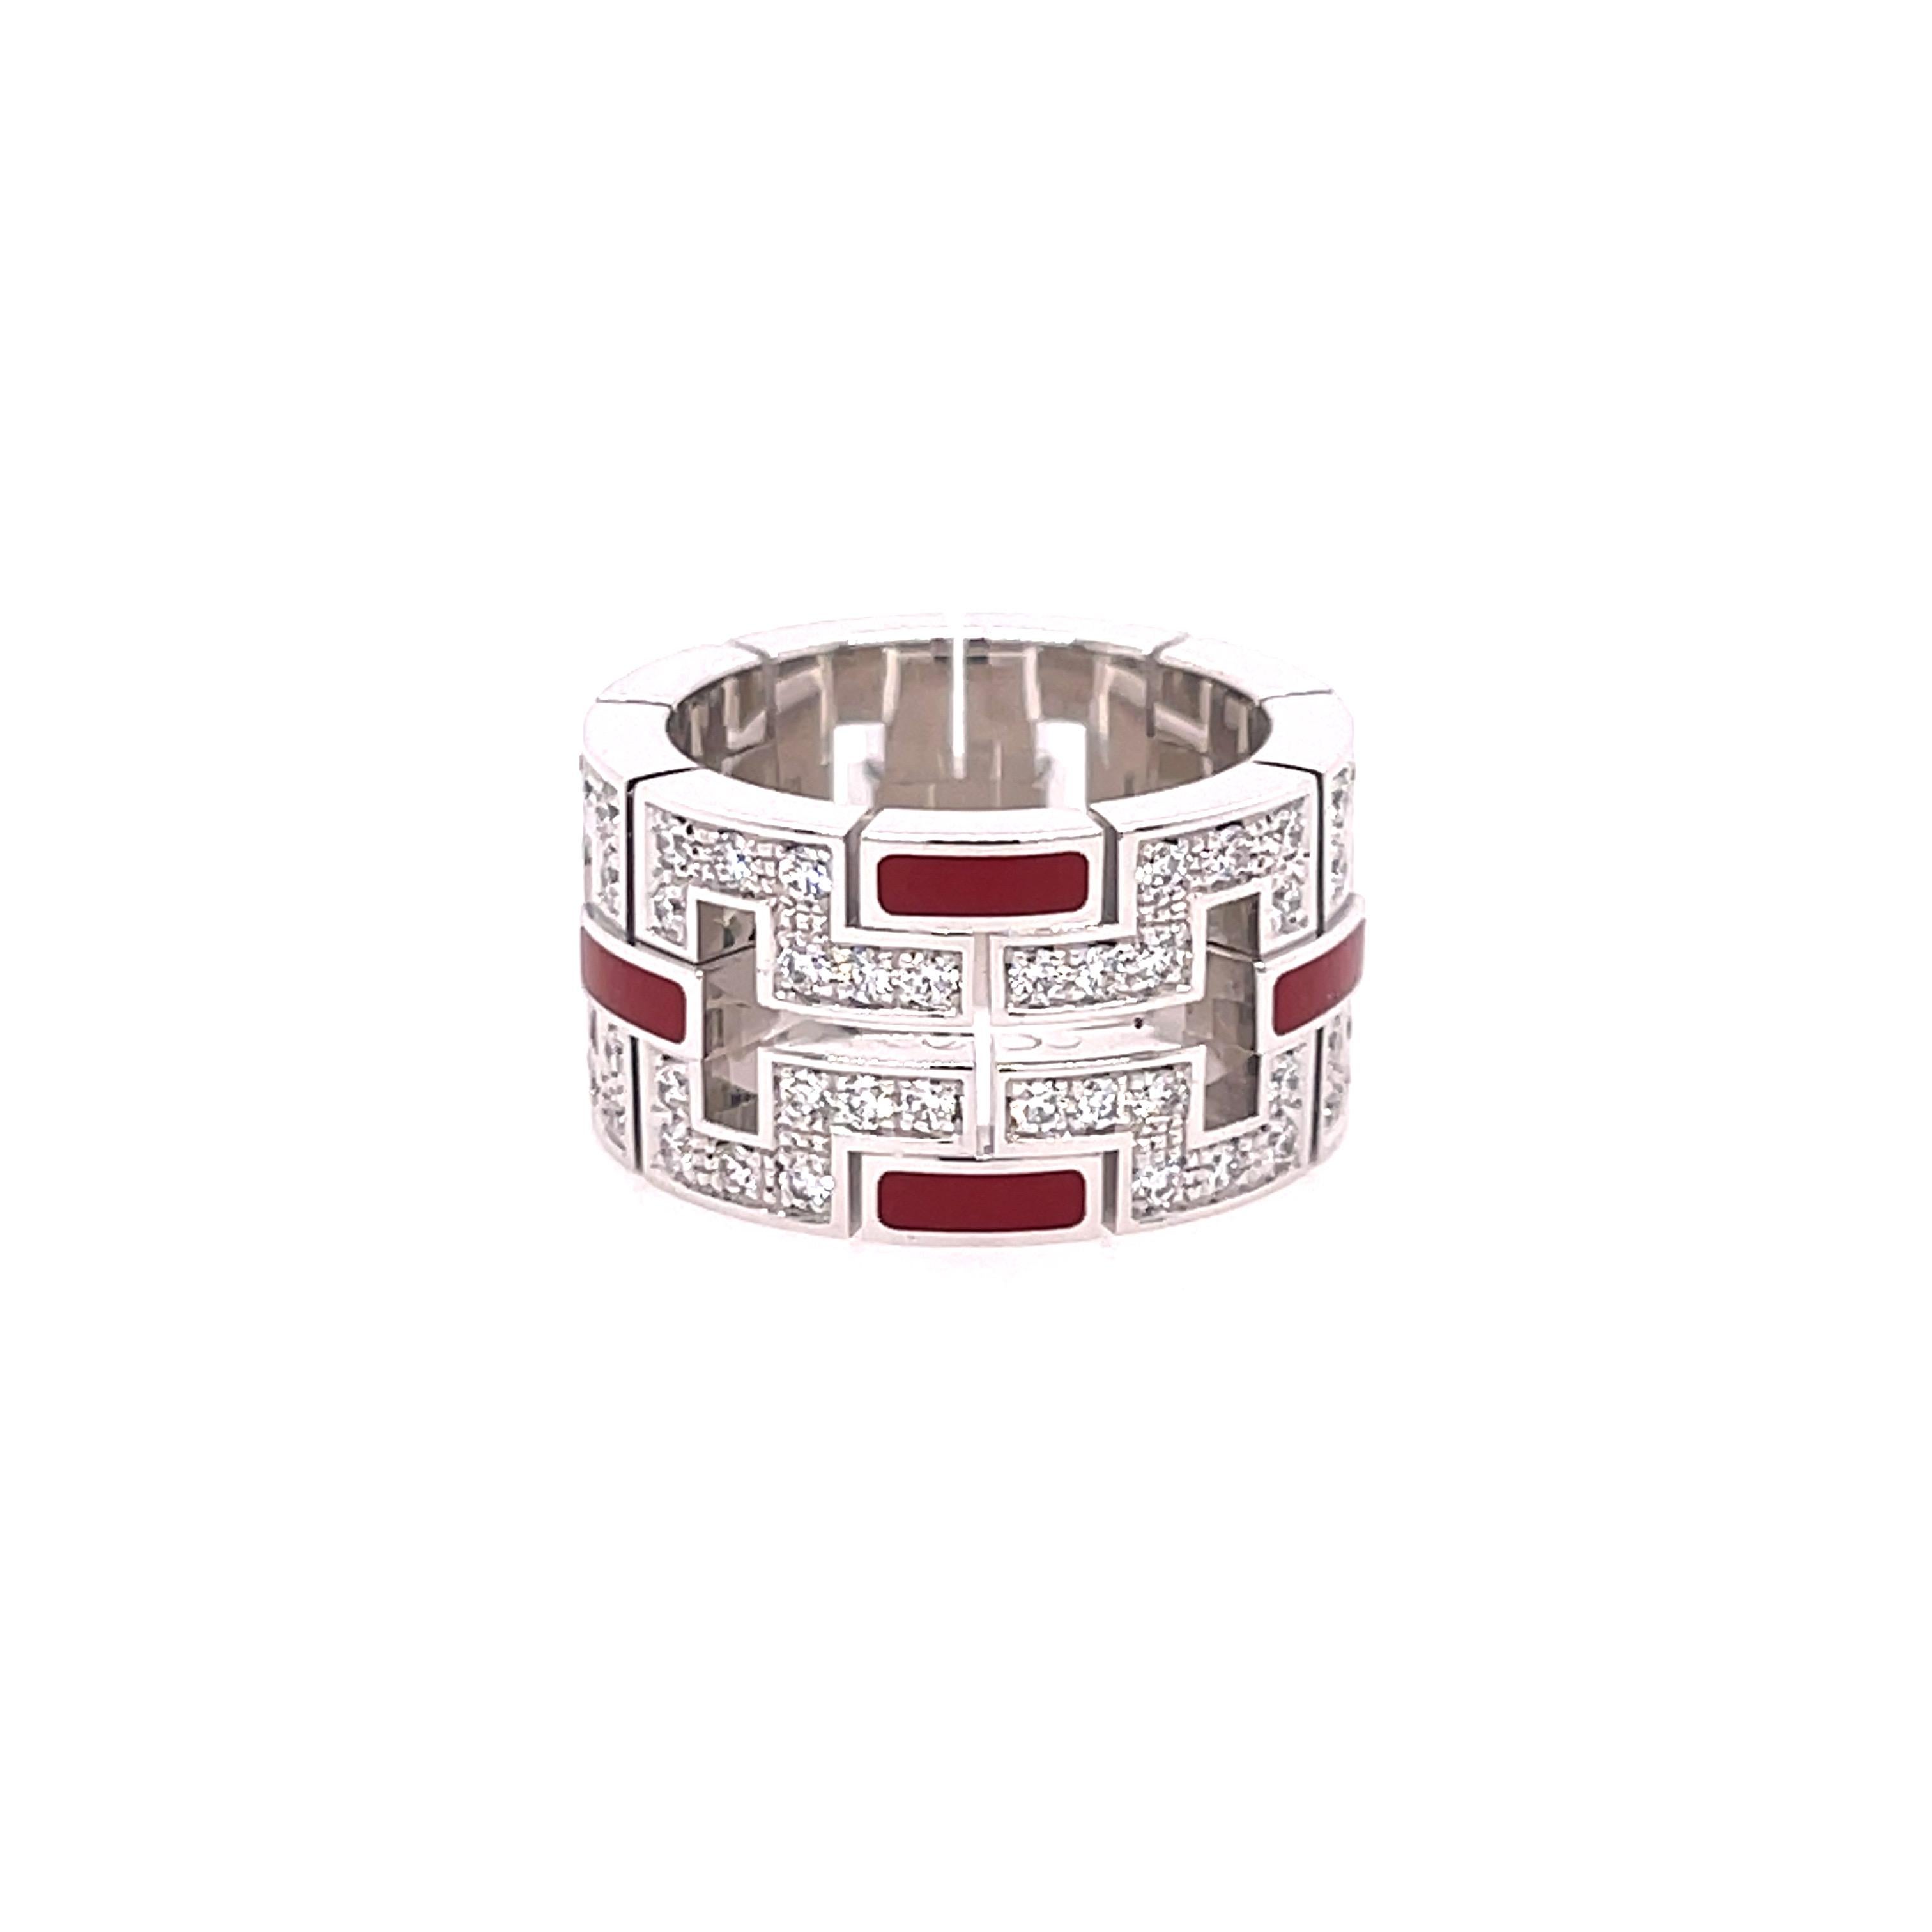 Cartier Le Baiser du Dragon Diamond & Red Enamel Ring in 18K White Gold. The ring features 84 brilliant round cut diamonds with an approximate 1.20ctw, G color, and VS clarity. 
Ring size 4.5 
11mm wide